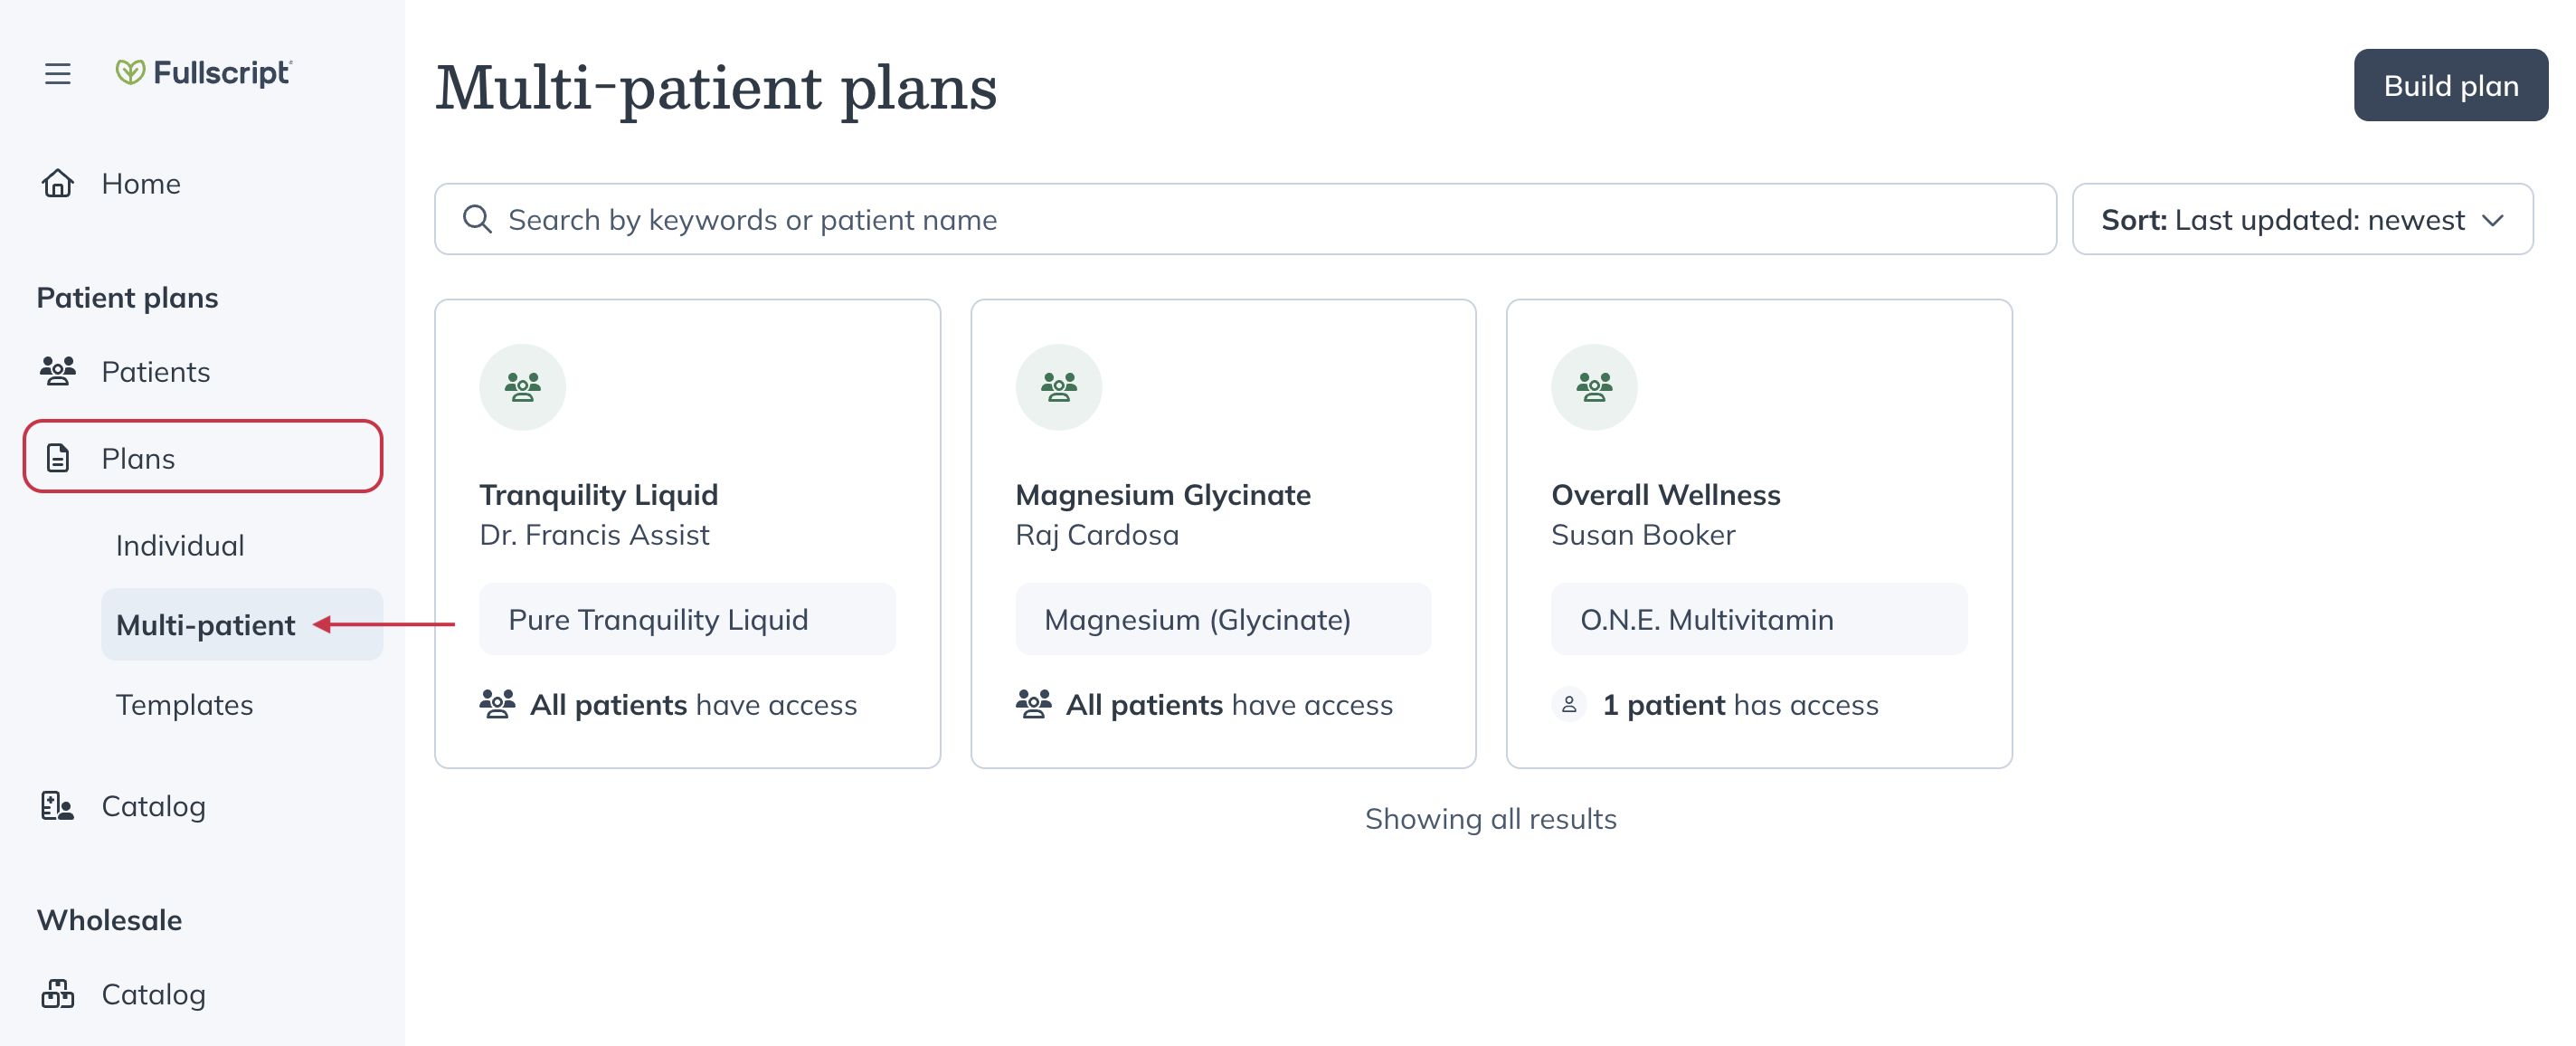 The multi-patient plan tab